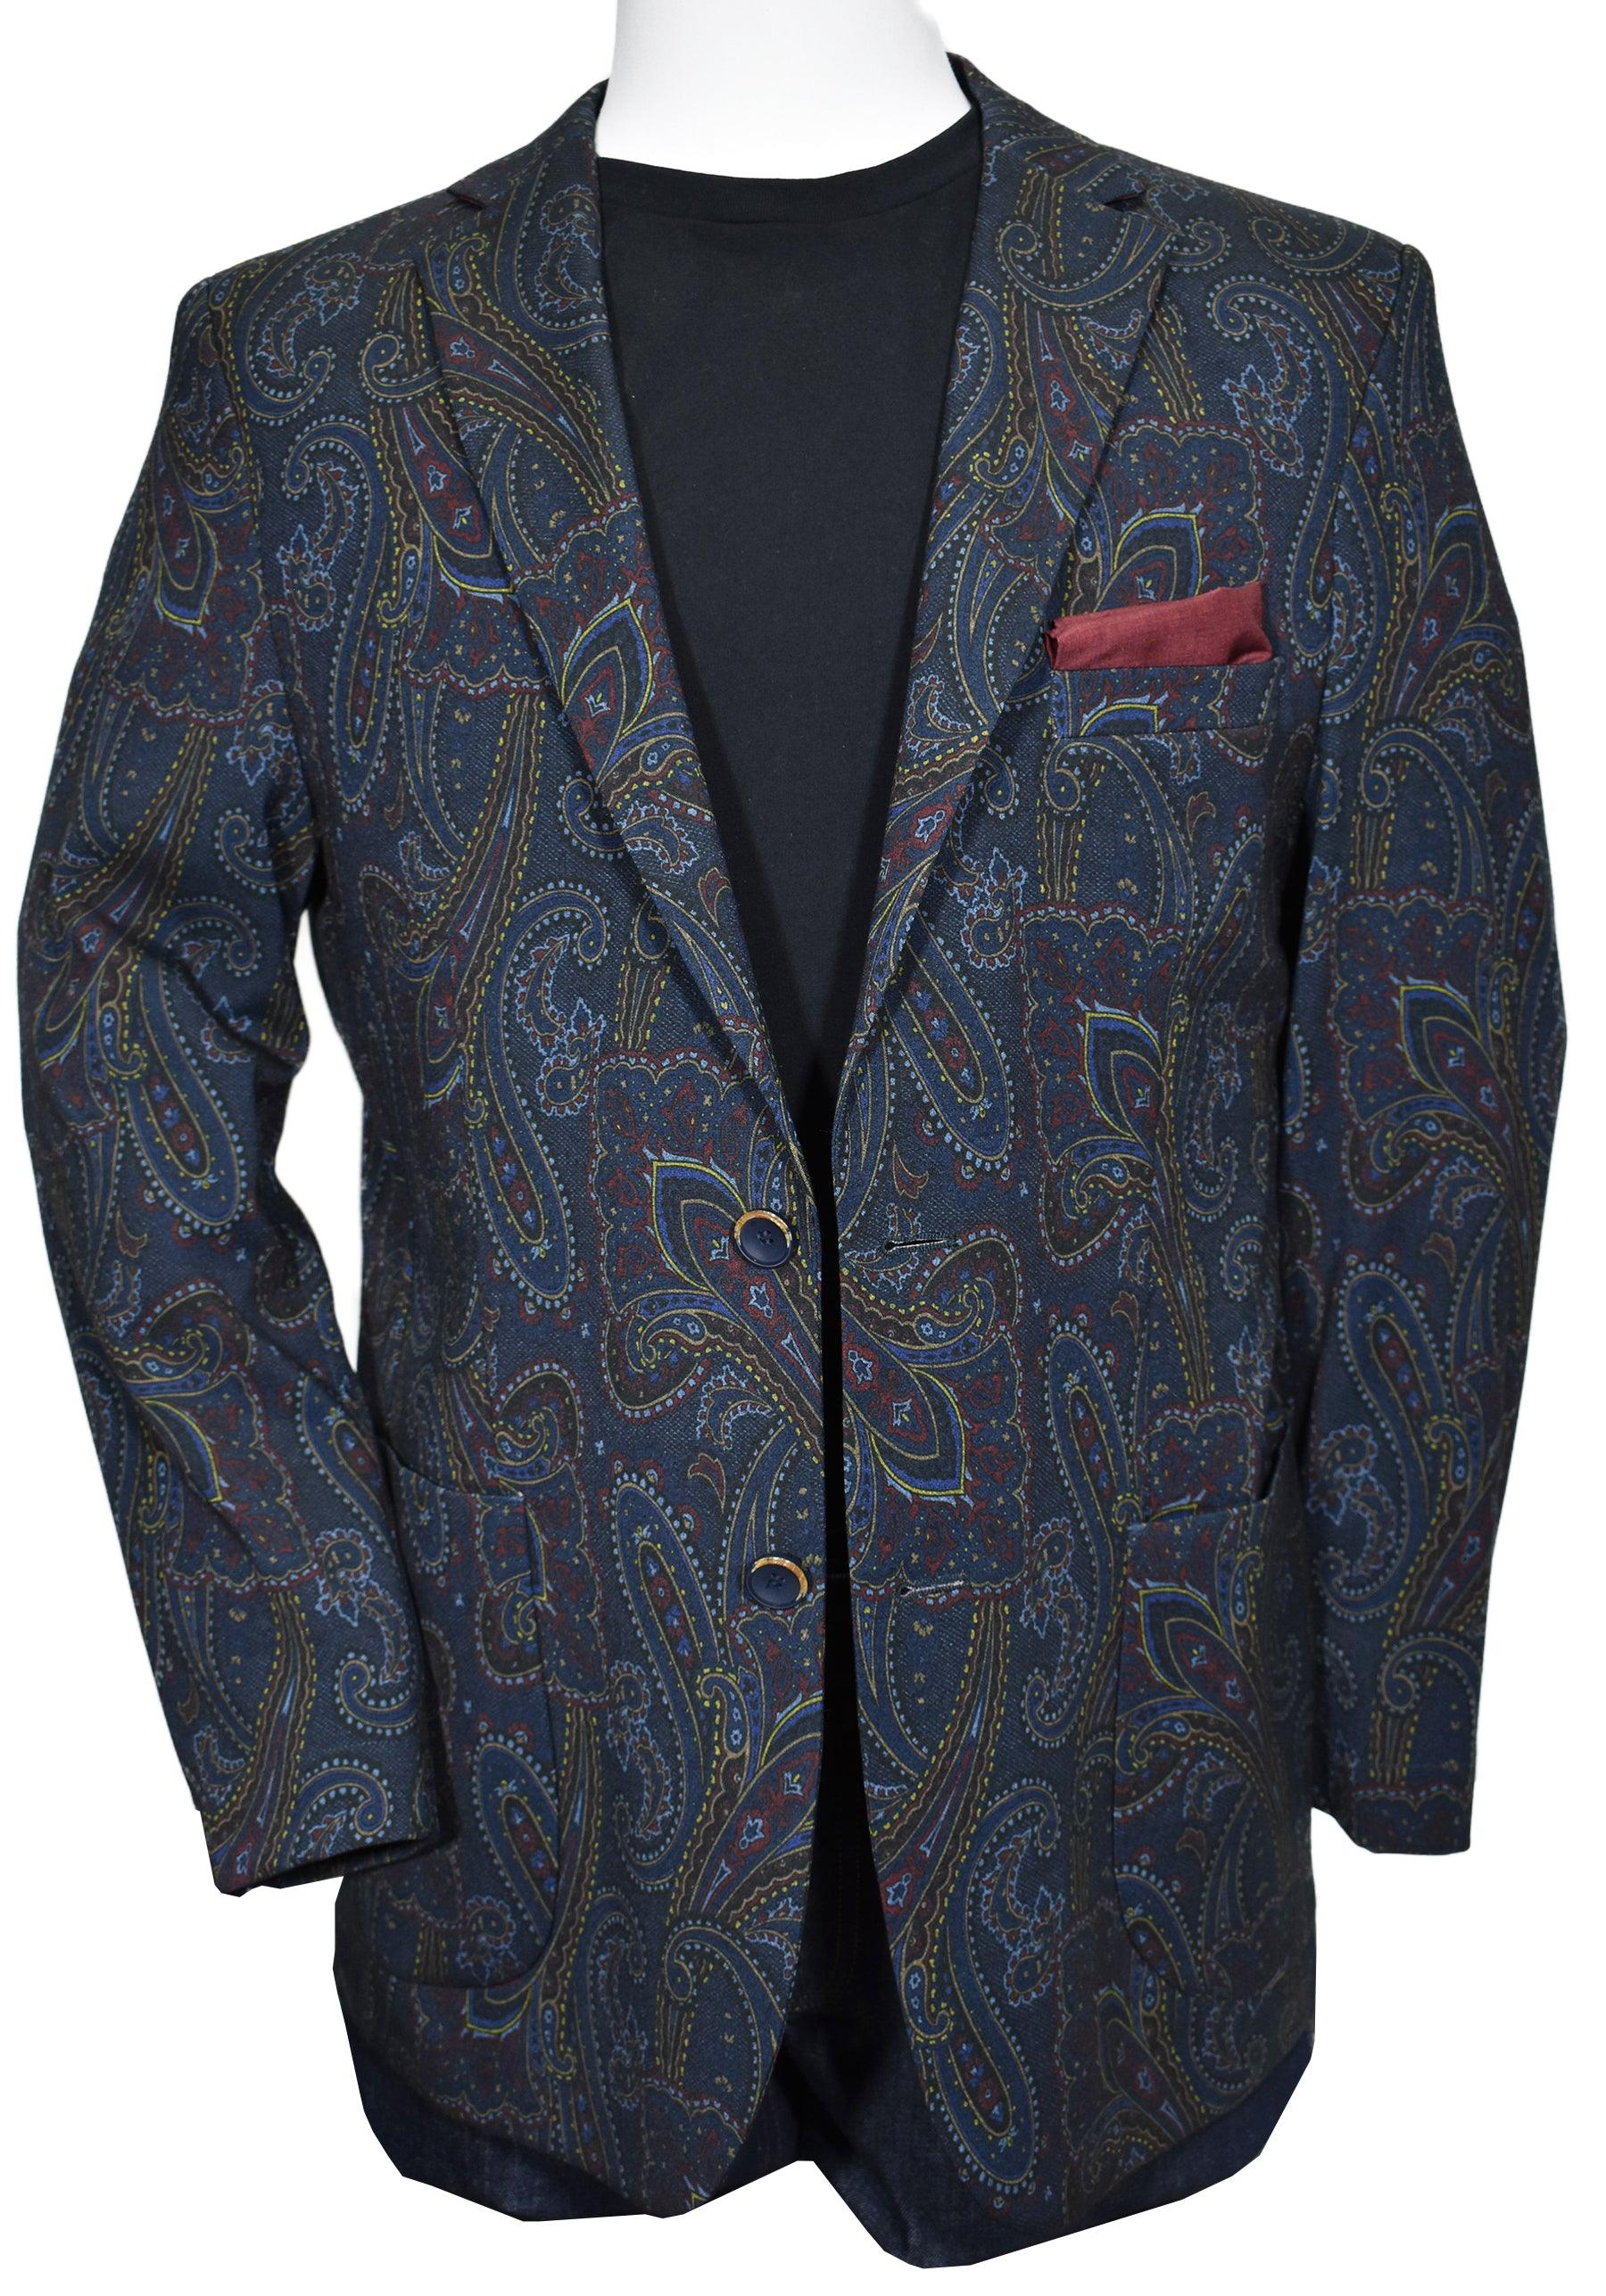 Combine a cool trend look with a performance fabric and you are ready to jet set. This jacket can be folded into a small bag that doubles as the pocket square. Open it up and throw it on, no ironing needed. Soft microfiber fabric, quarter lined and modern fit with a little stretch.  Visconti Navy Paisley Traveler Coat  Soft microfiber fabric resists wrinkling. Great for traveling, crumple it up, fold it tight, ready to wear. Dark navy with paisley fashion detailing. Quarter lined. Modern Fit